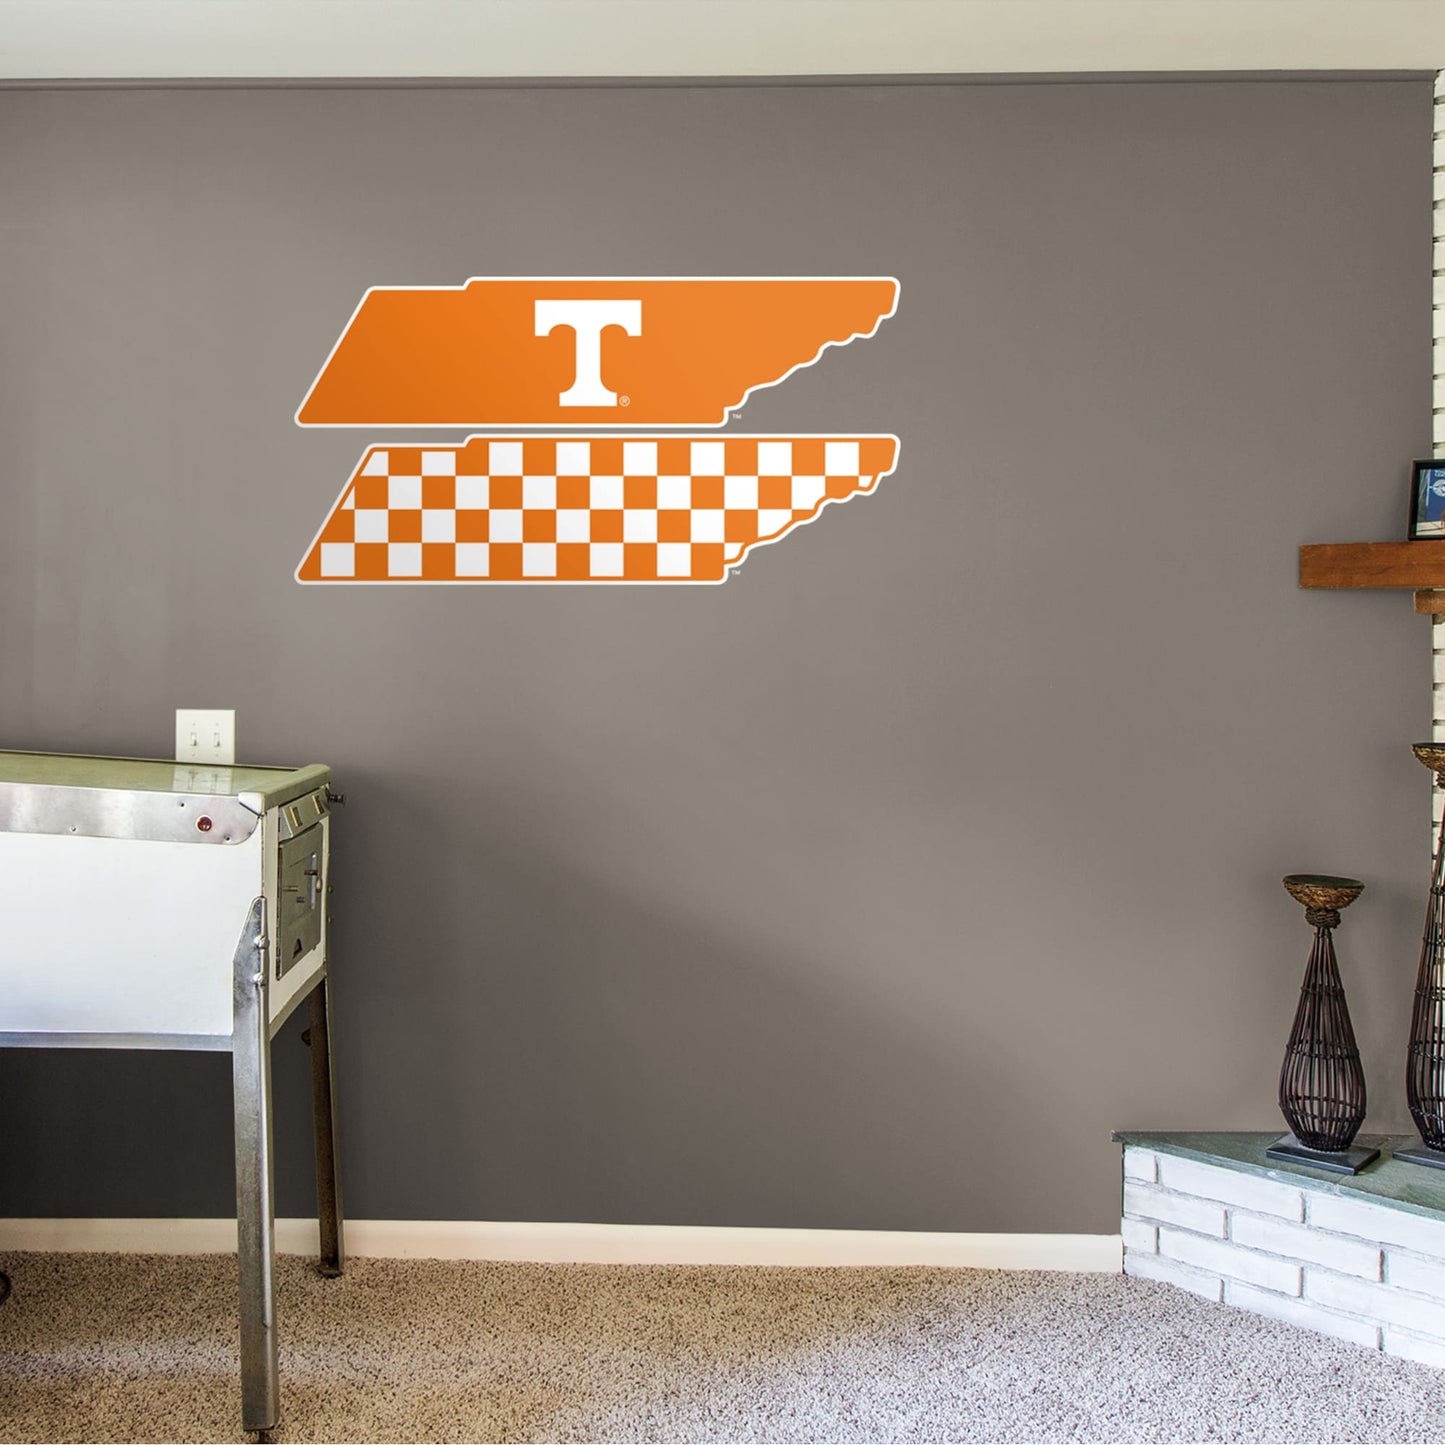 Tennessee Volunteers: State of Tennessee - Officially Licensed Removable Wall Decal